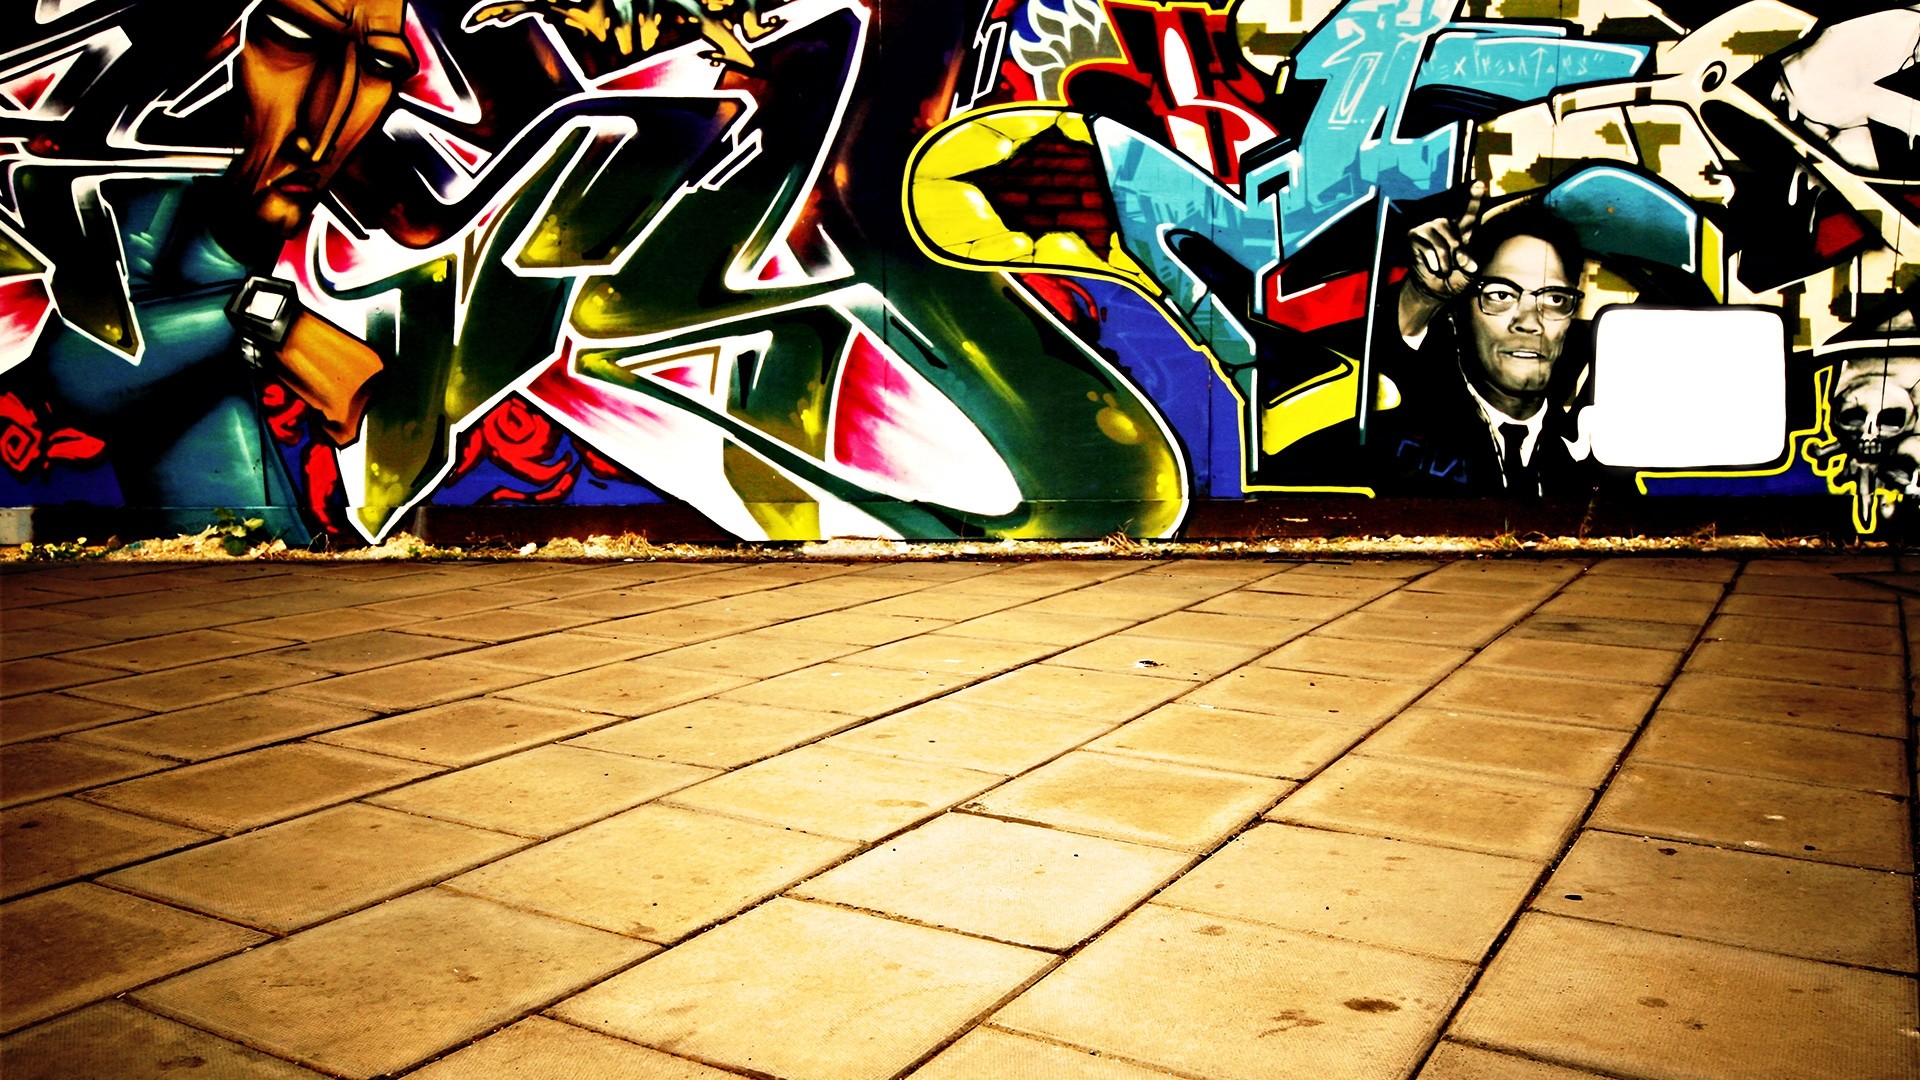 Graffiti Wall Desktop Wallpaper with image resolution 1920x1080 pixel. You can use this wallpaper as background for your desktop Computer Screensavers, Android or iPhone smartphones